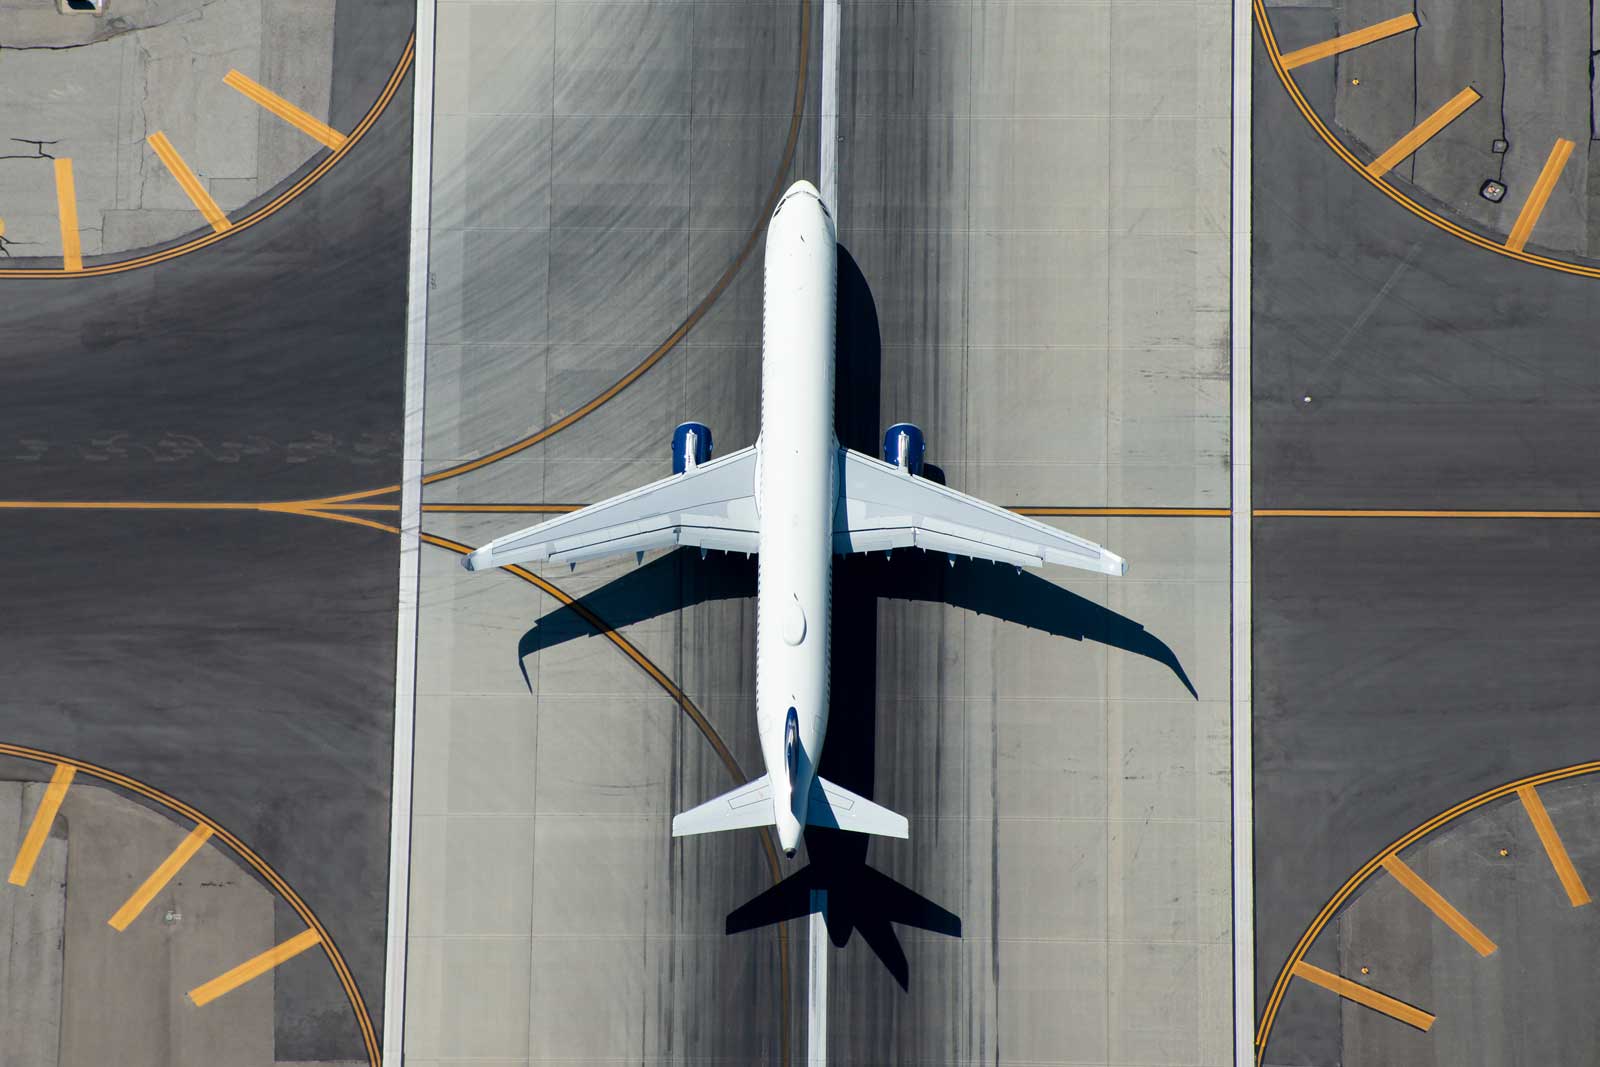 A large plane on the runway taken from directly overhead